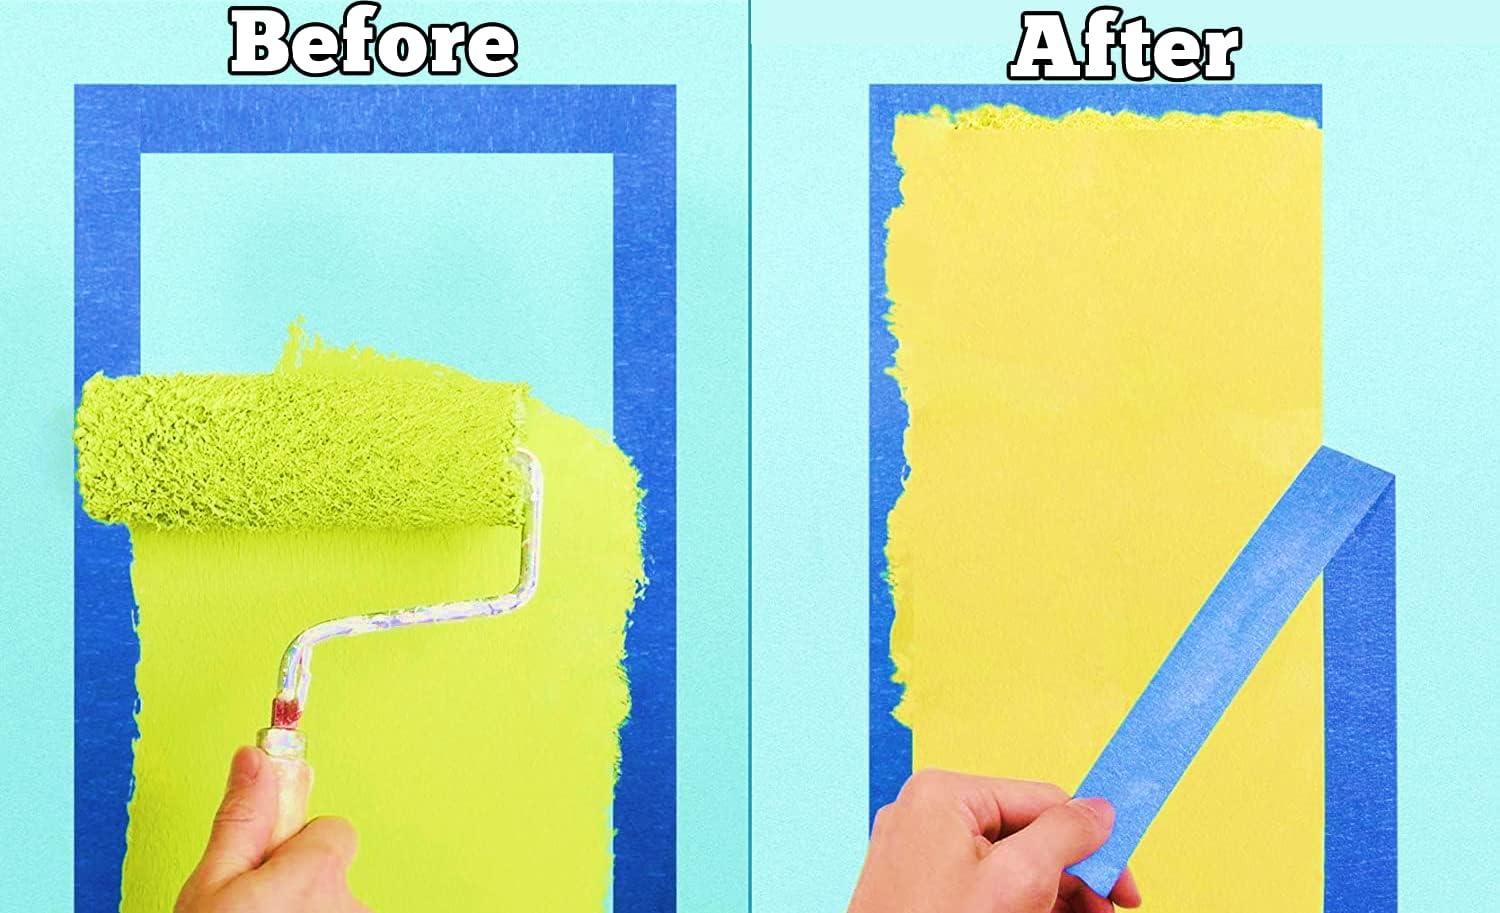 What is the difference between Green,Yellow and Blue painters tape?